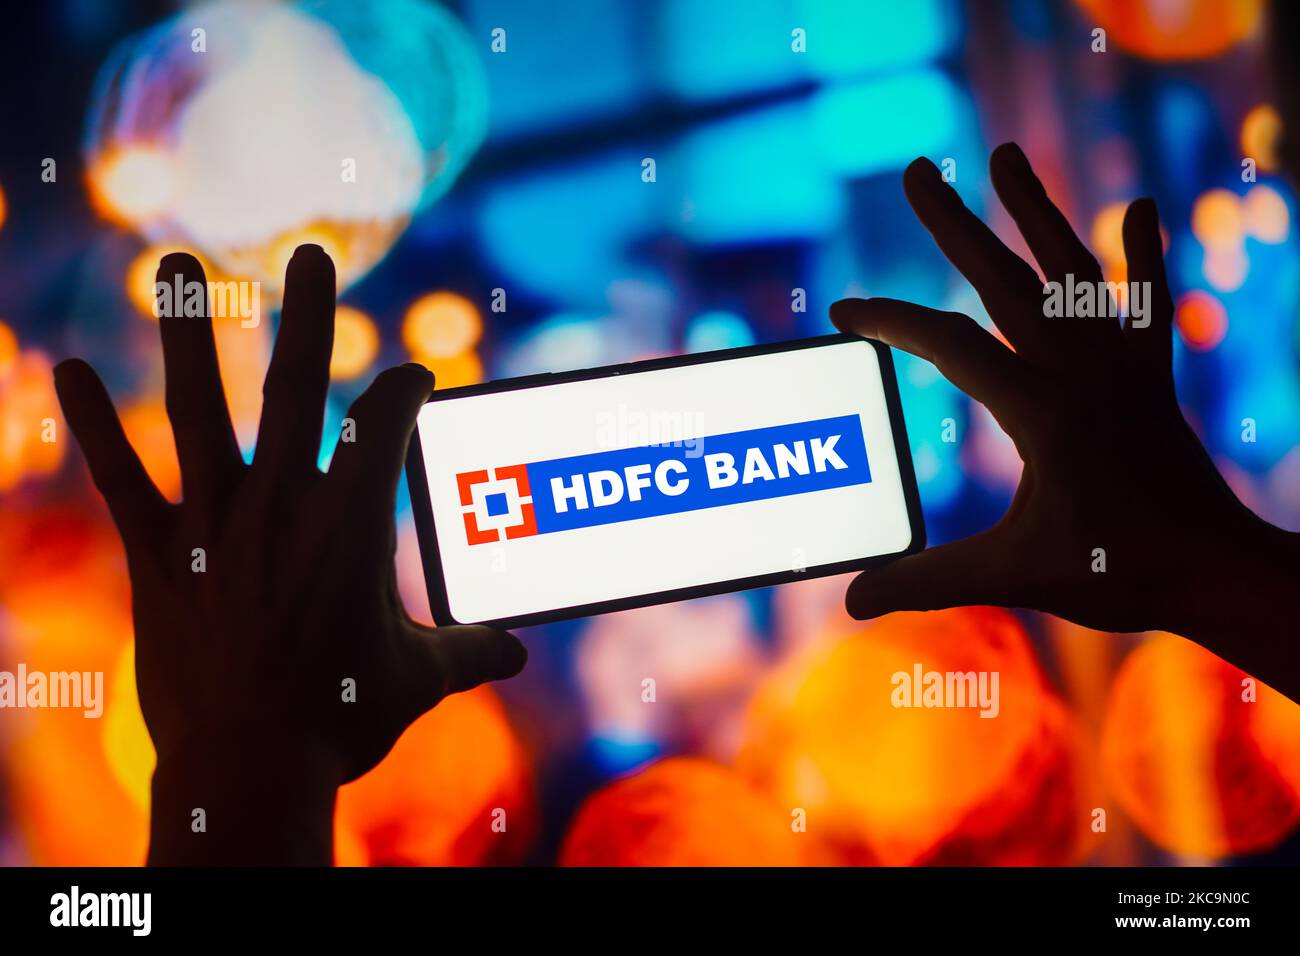 RBI lifts all restrictions on HDFC Bank permits new digital launches